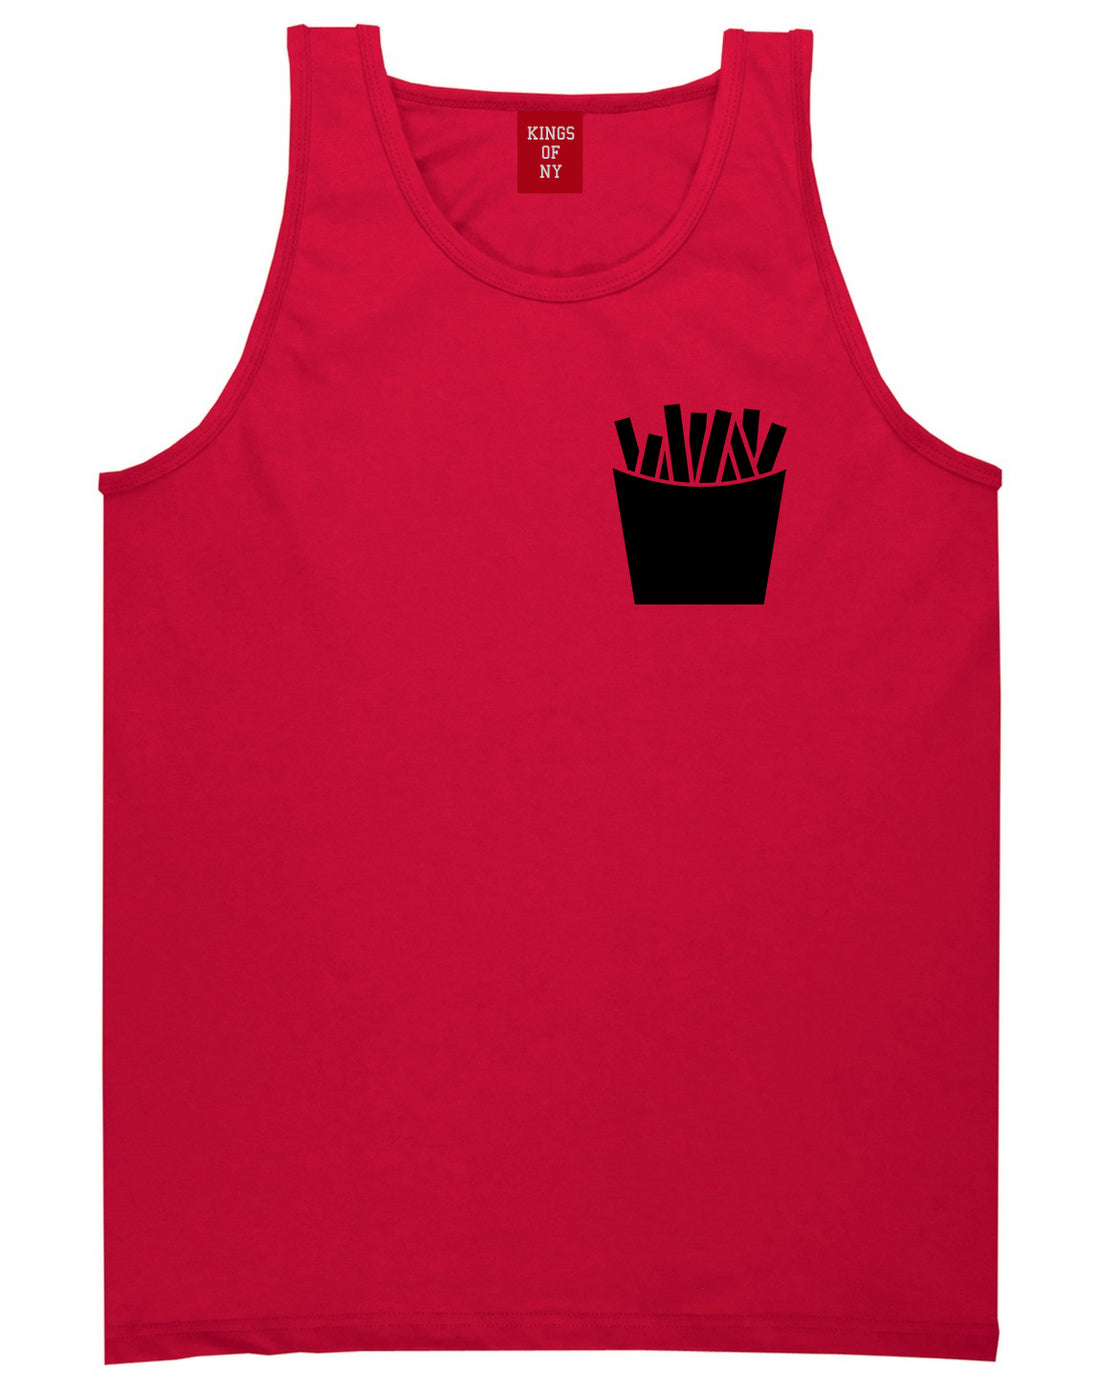 French Fry Fries Chest Mens Red Tank Top Shirt by KINGS OF NY